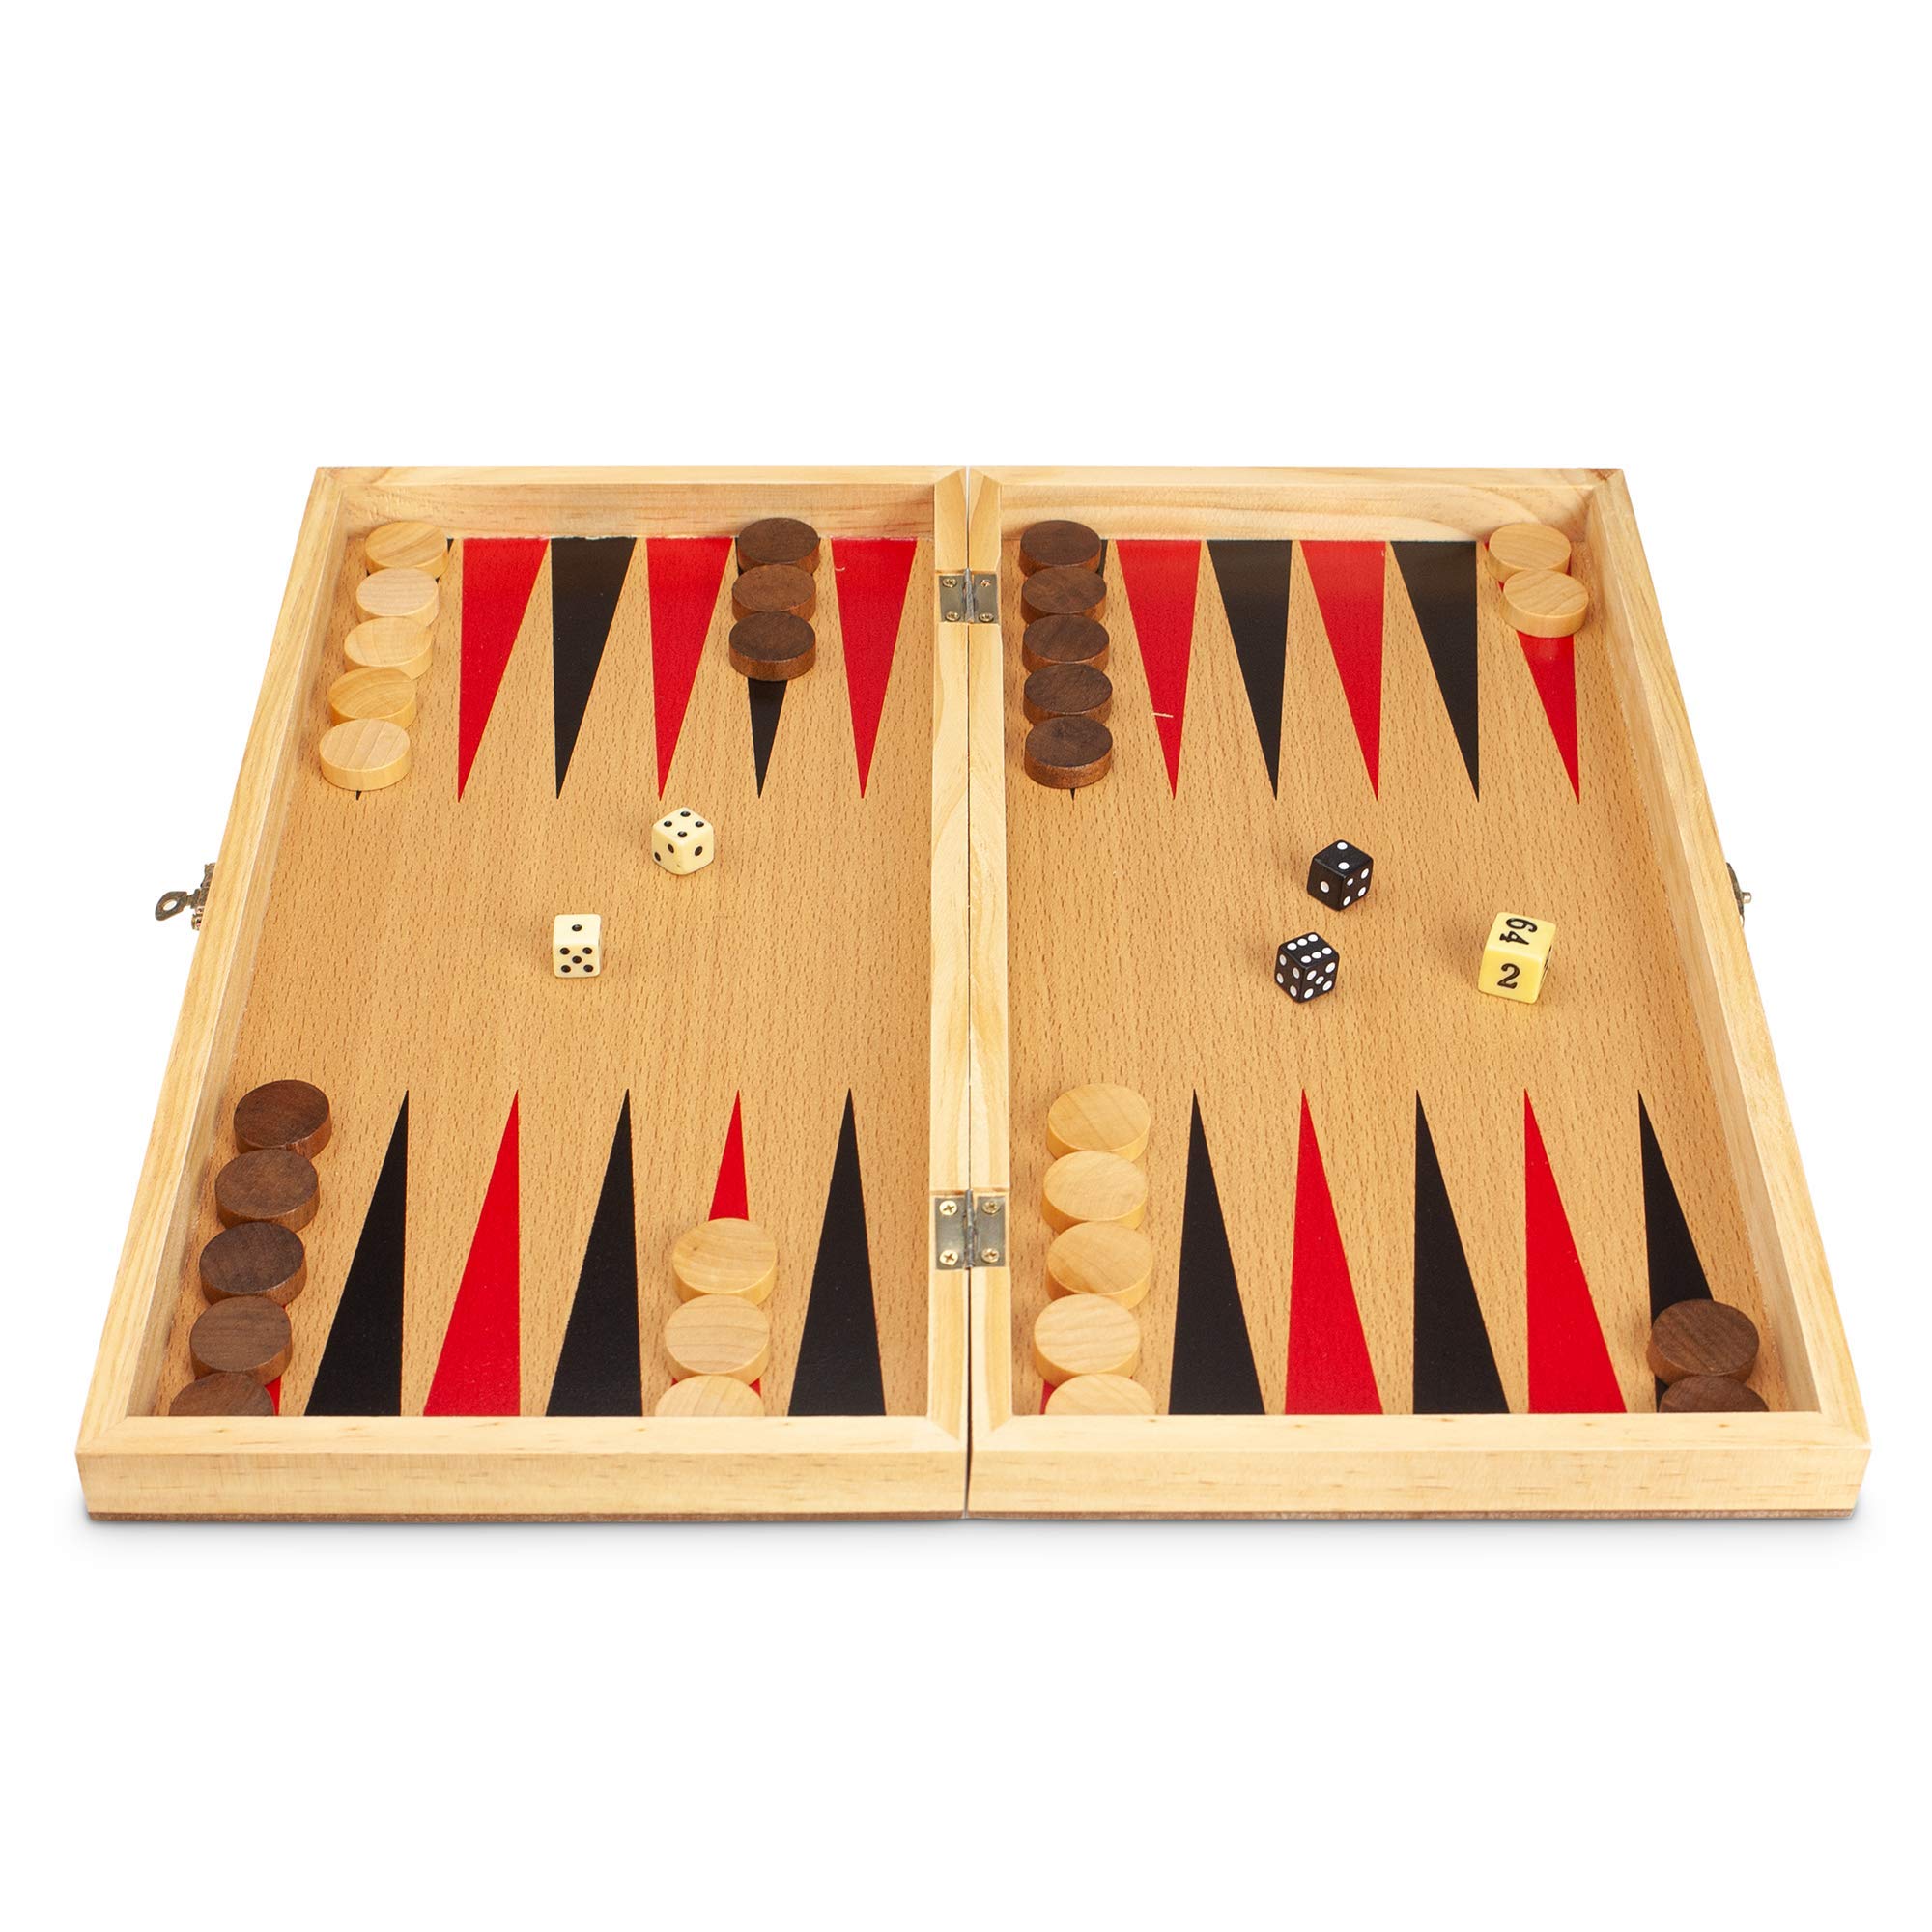 STERLING Games 3 in 1 Chess Checkers Backgammon Game Set with 15in Wooden Folding Board for Storage